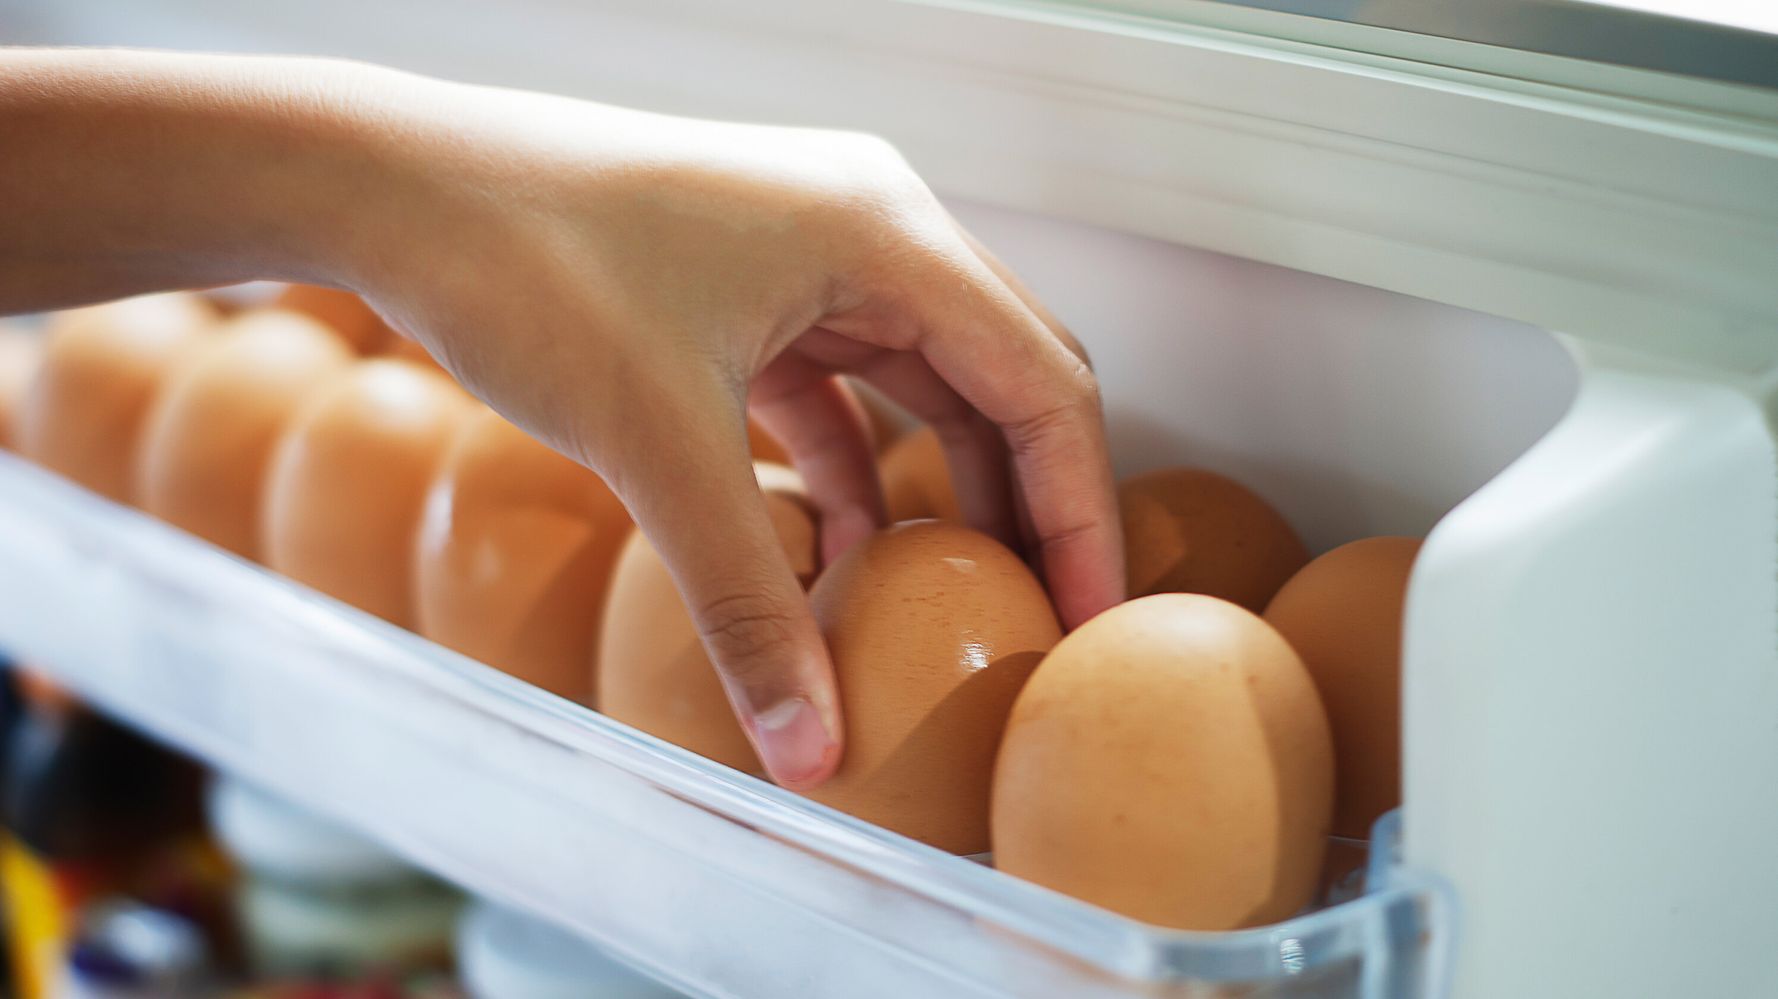 When do I have to refrigerate my eggs?